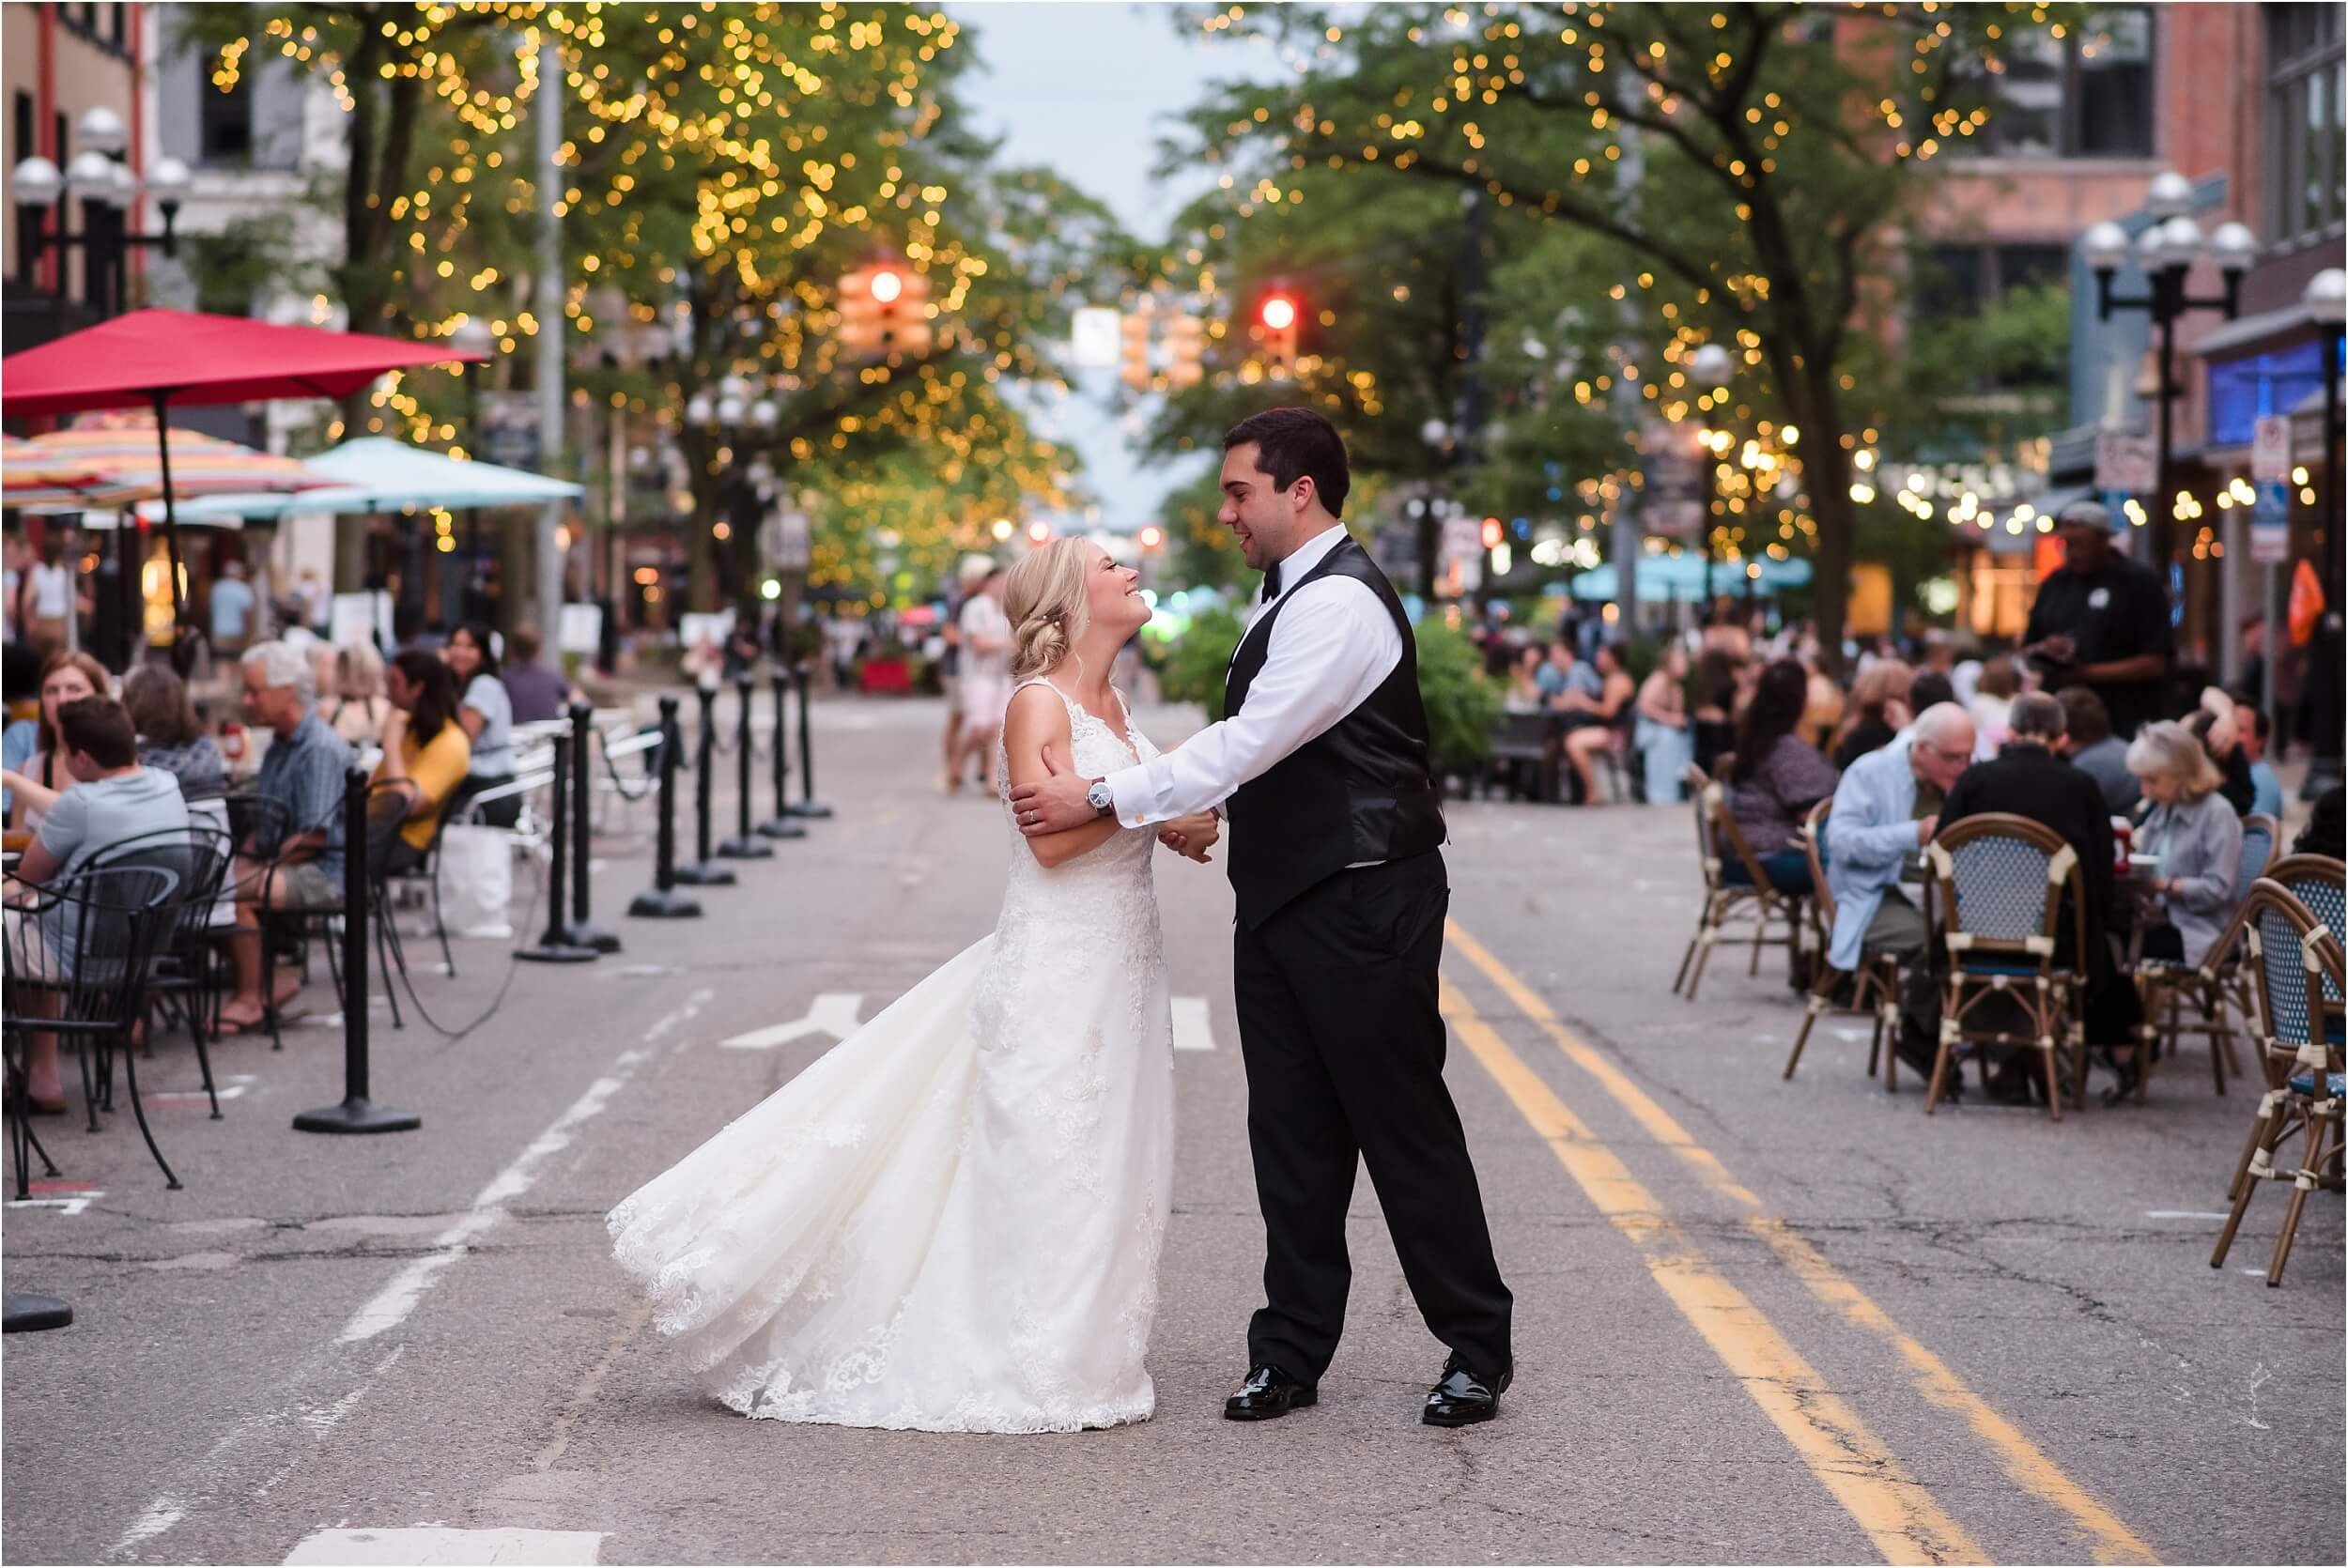  A couple dances in the middle of a shutdown Main St in downtown Ann Arbor.  